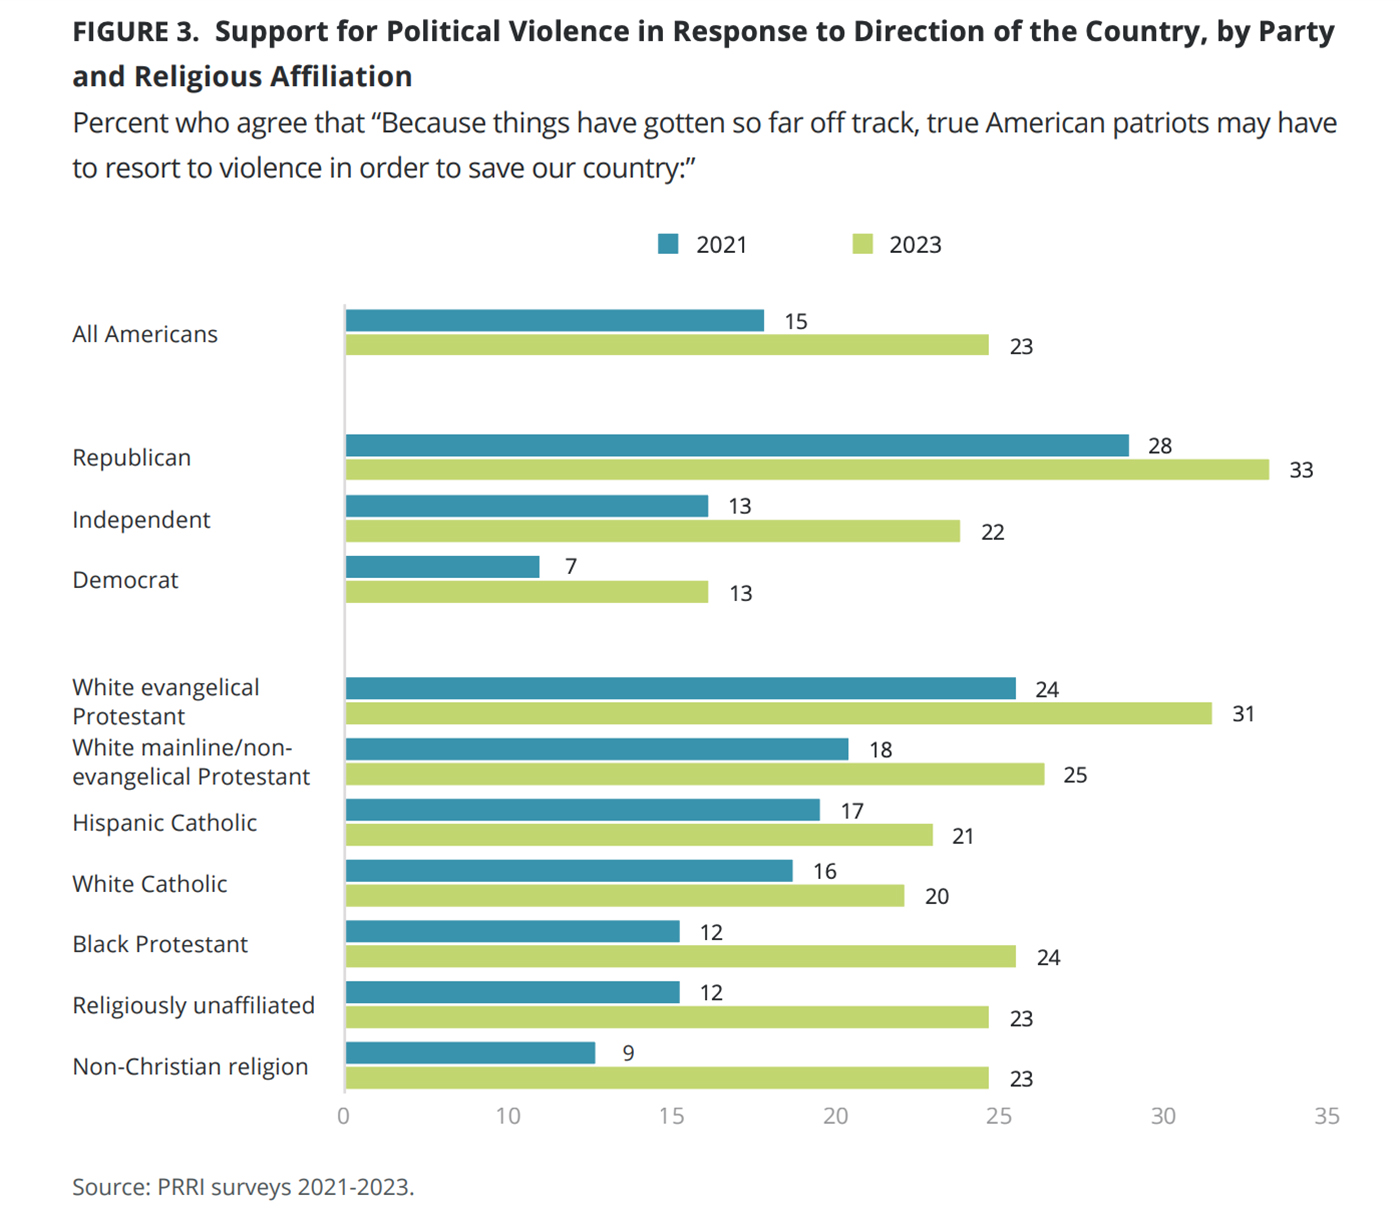 "Support for Political Violence in Response to Direction of the Country, by Party and Religious Affiliation" Graphic courtesy PRRI